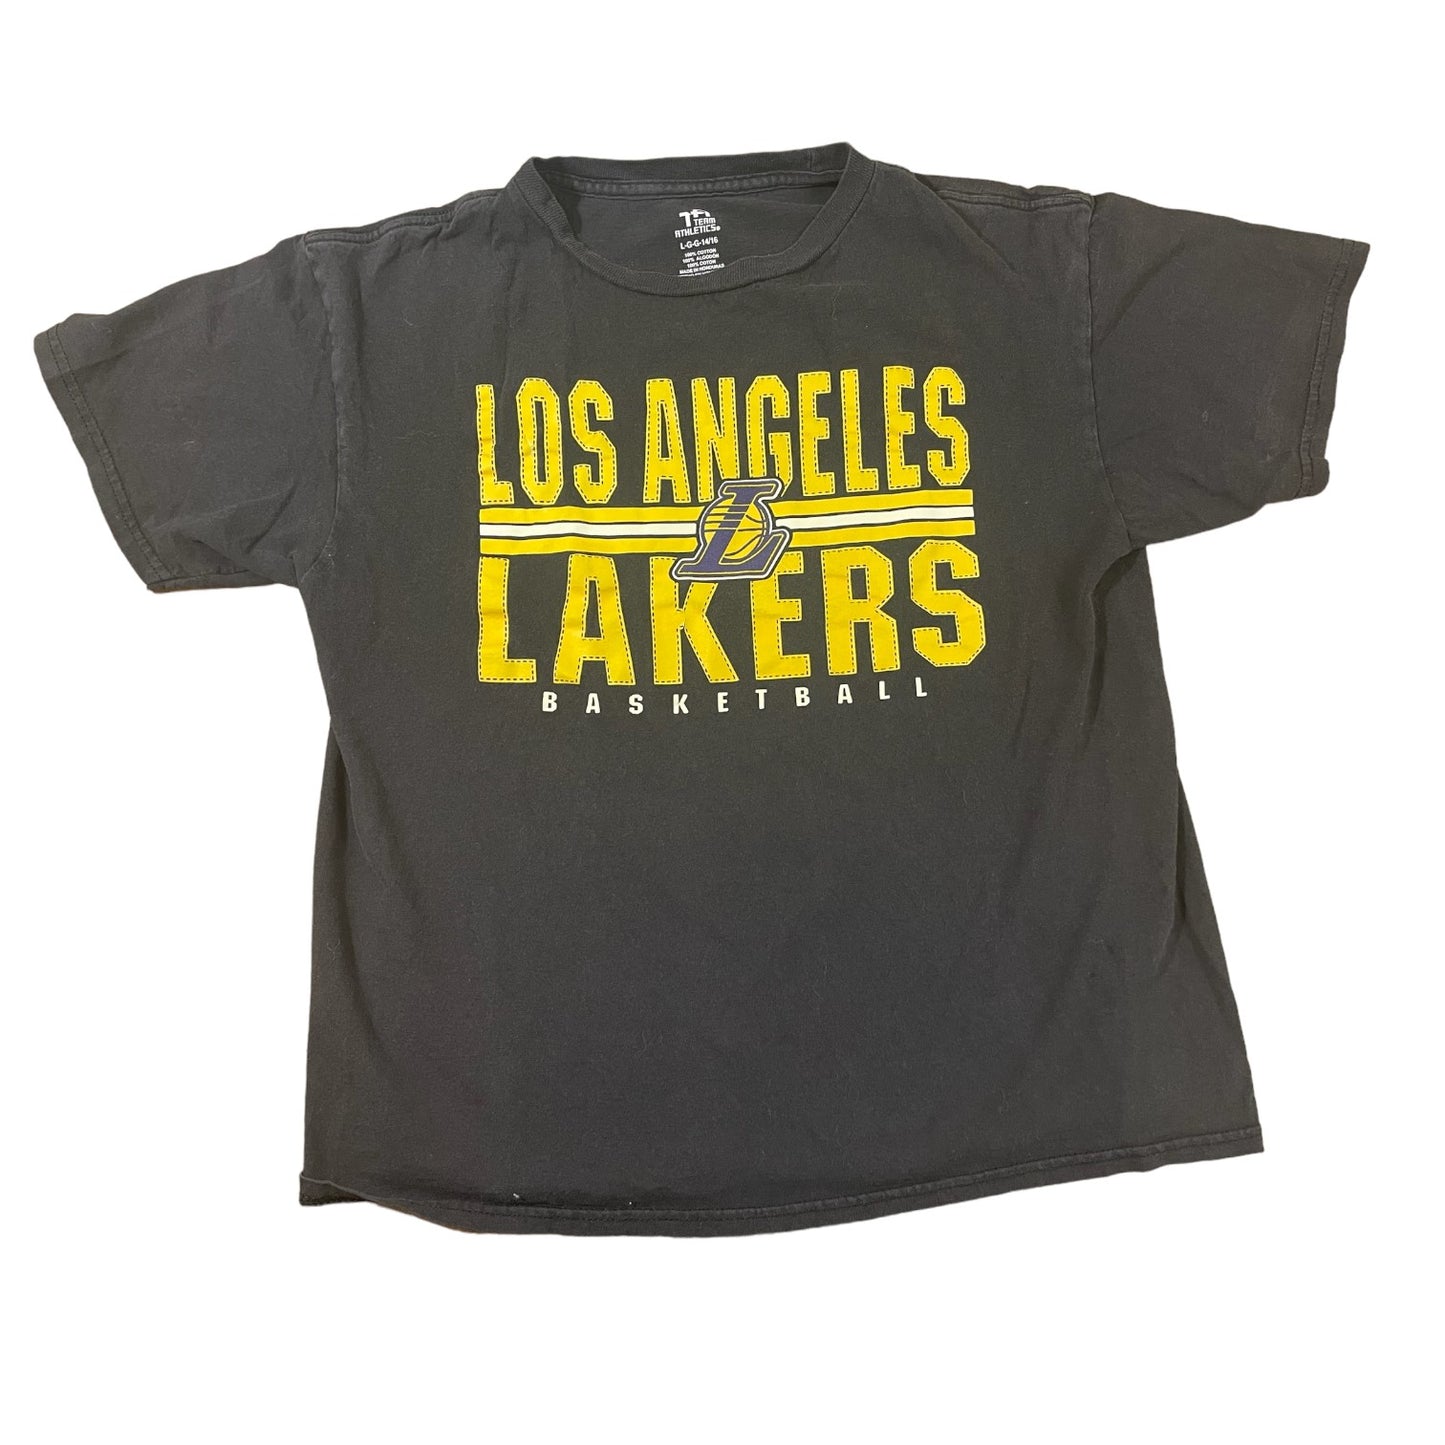 Los Angeles Lakers Boys Tee Size Large 14-16 Black and yellow